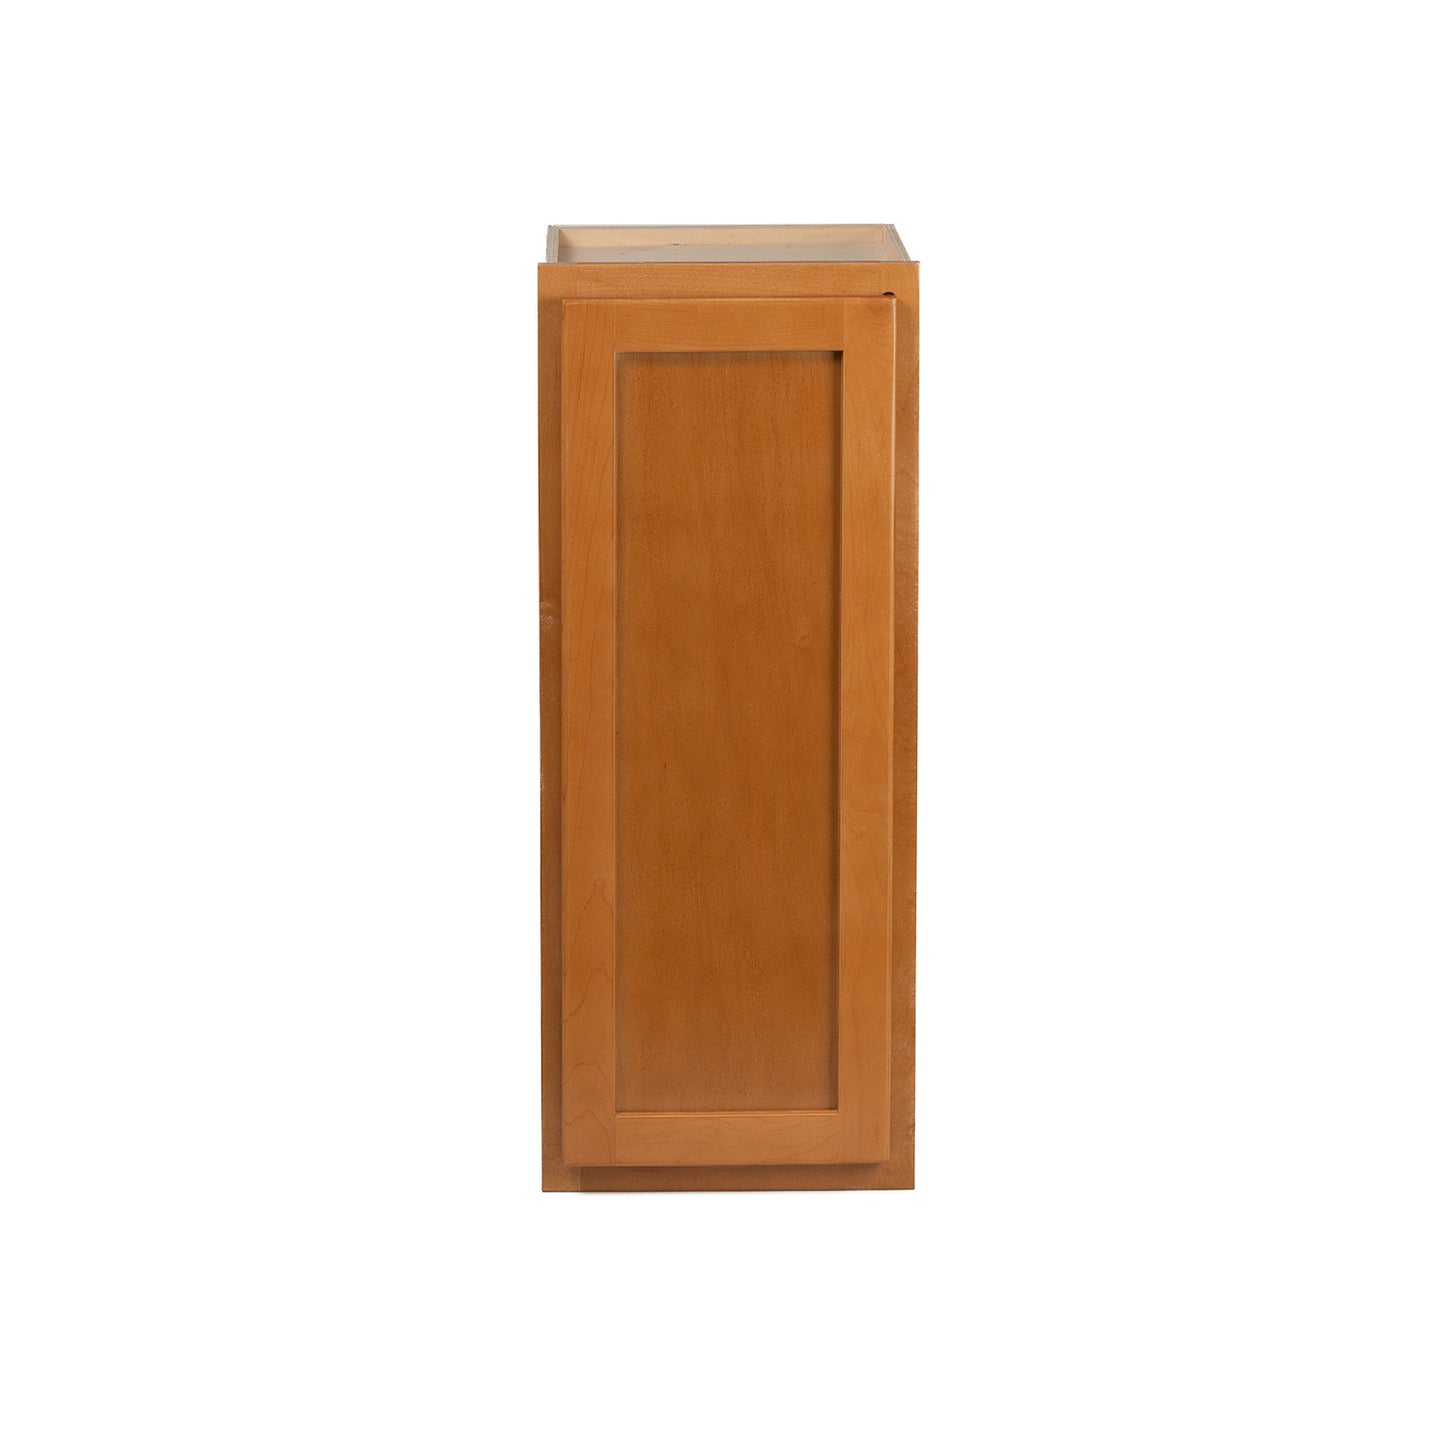 Quicklock RTA (Ready-to-Assemble) Provincial Stain 21"Wx30"Hx12"D Wall Cabinet